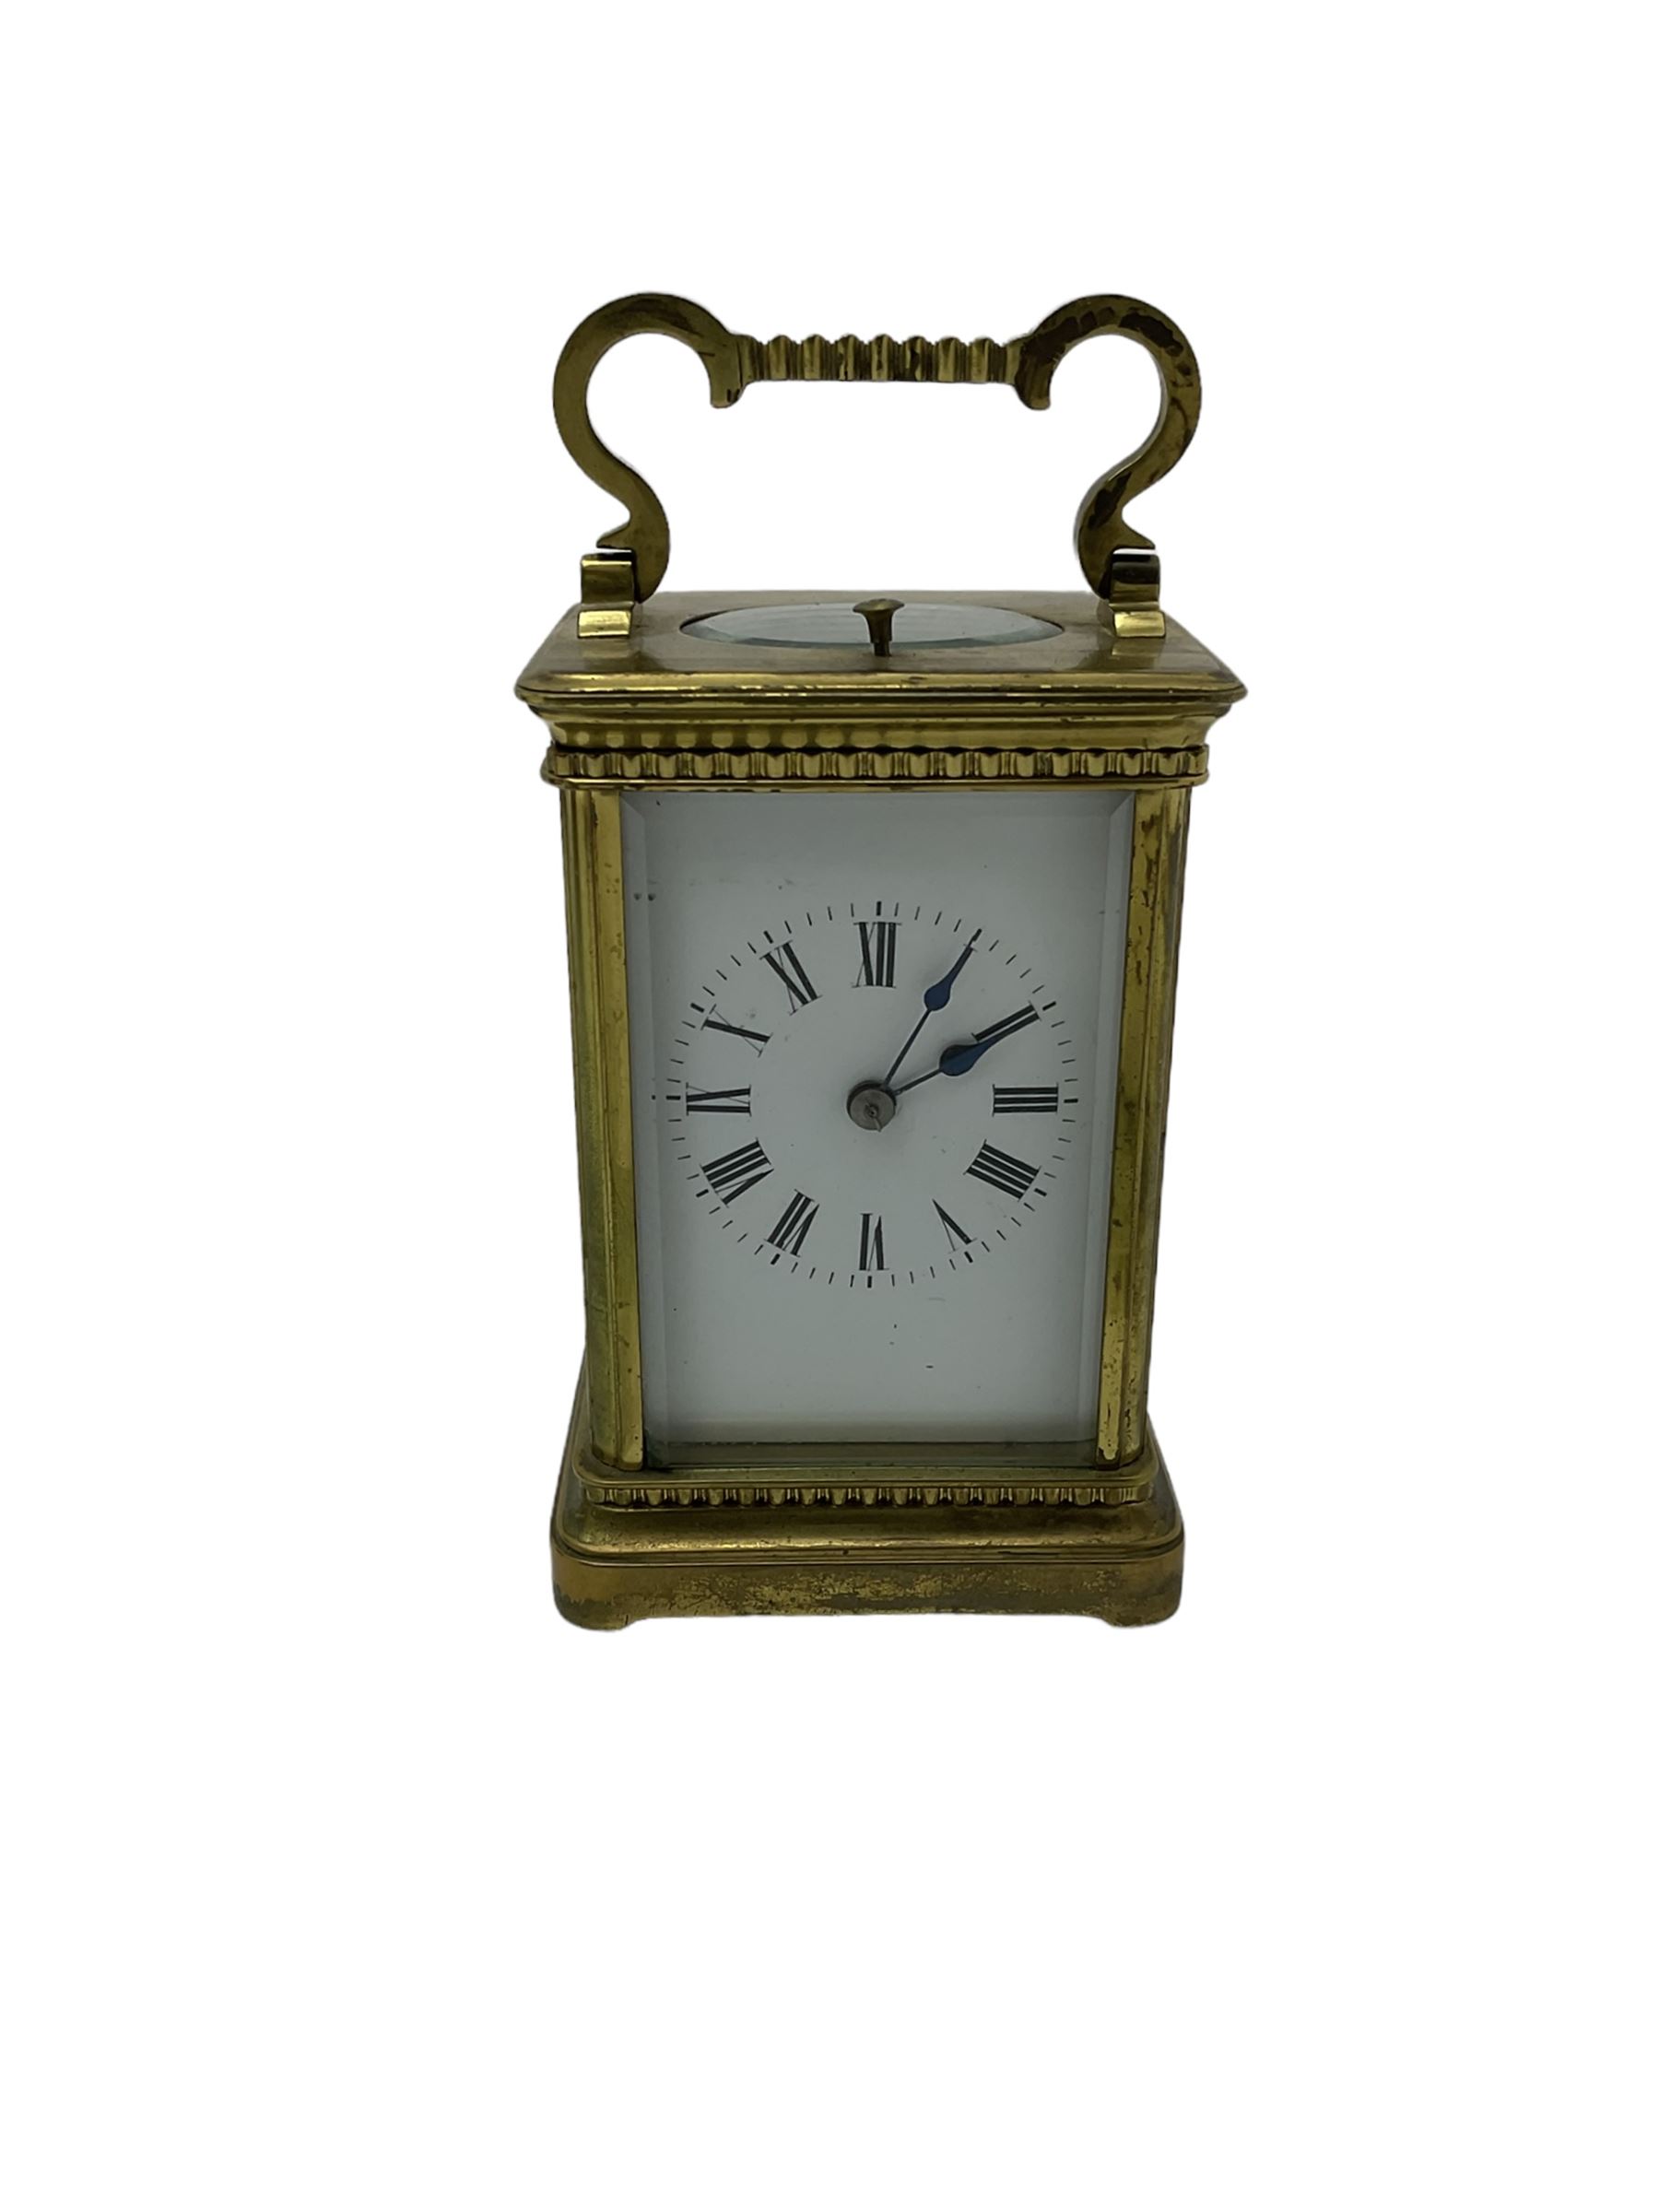 French carriage clock c1910 with strike and repeat work in a corniche case with beadwork - Image 6 of 6